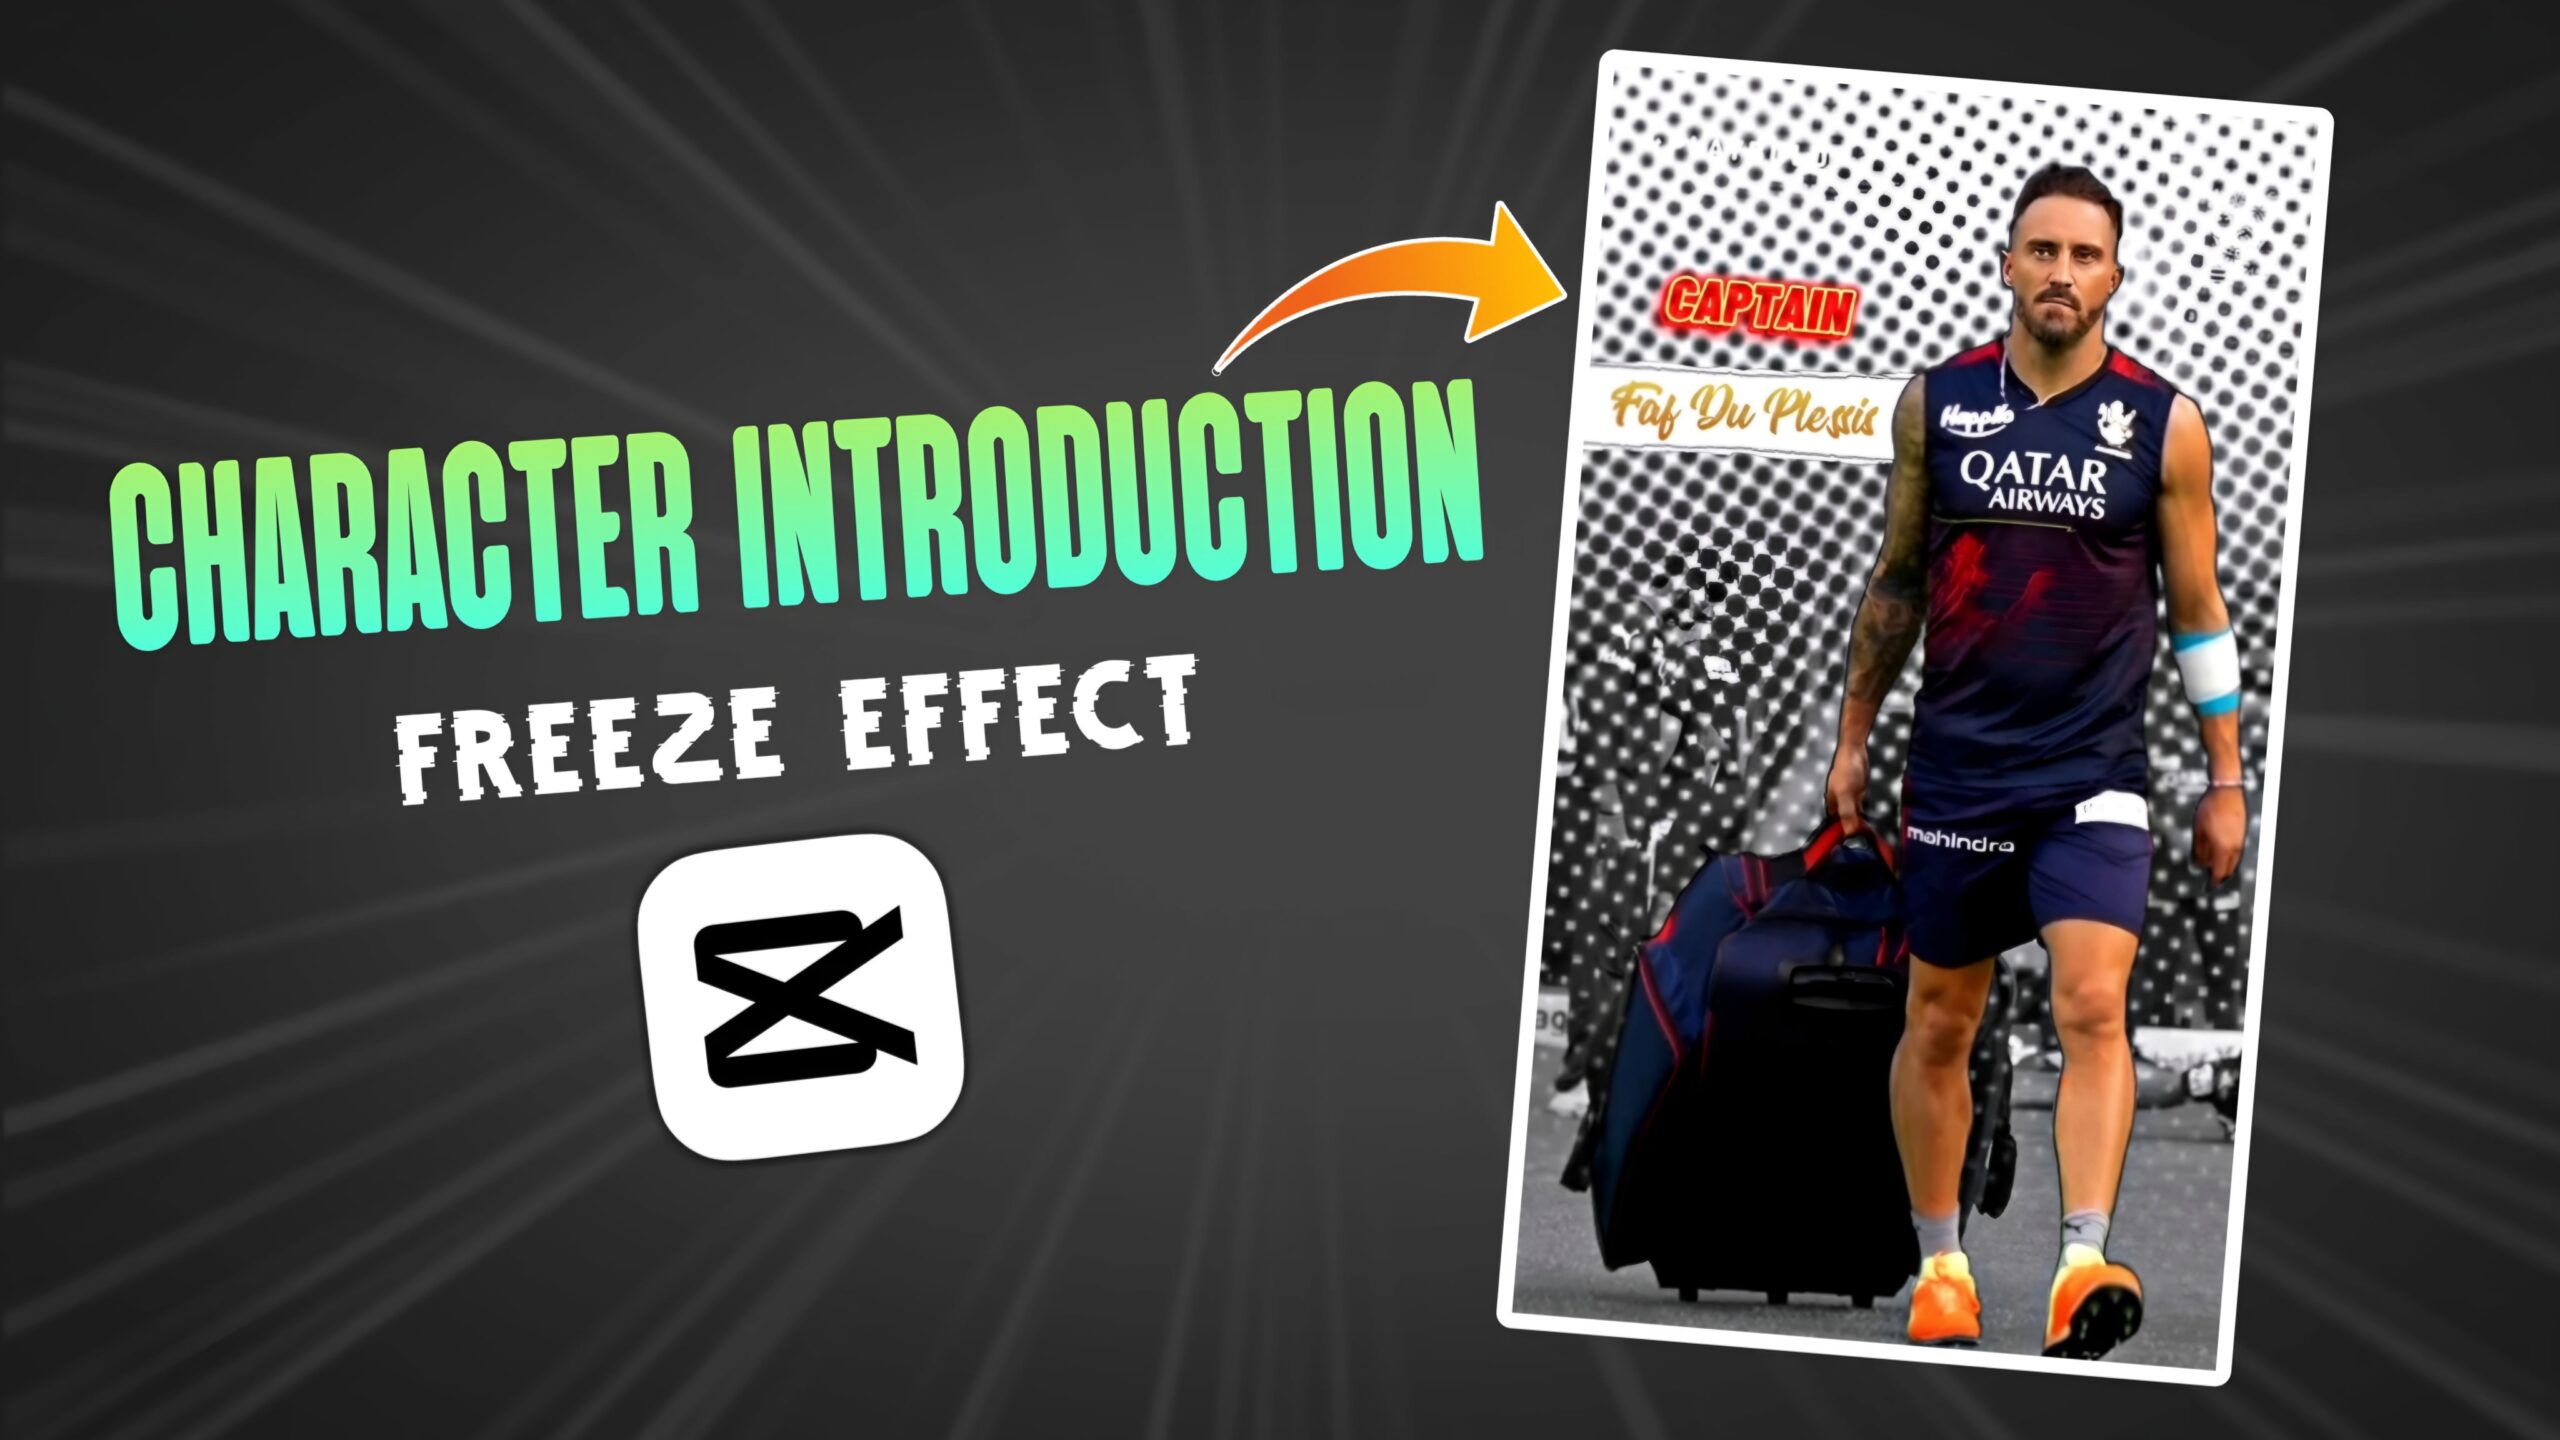 Character Introduction Freeze Frame Effect